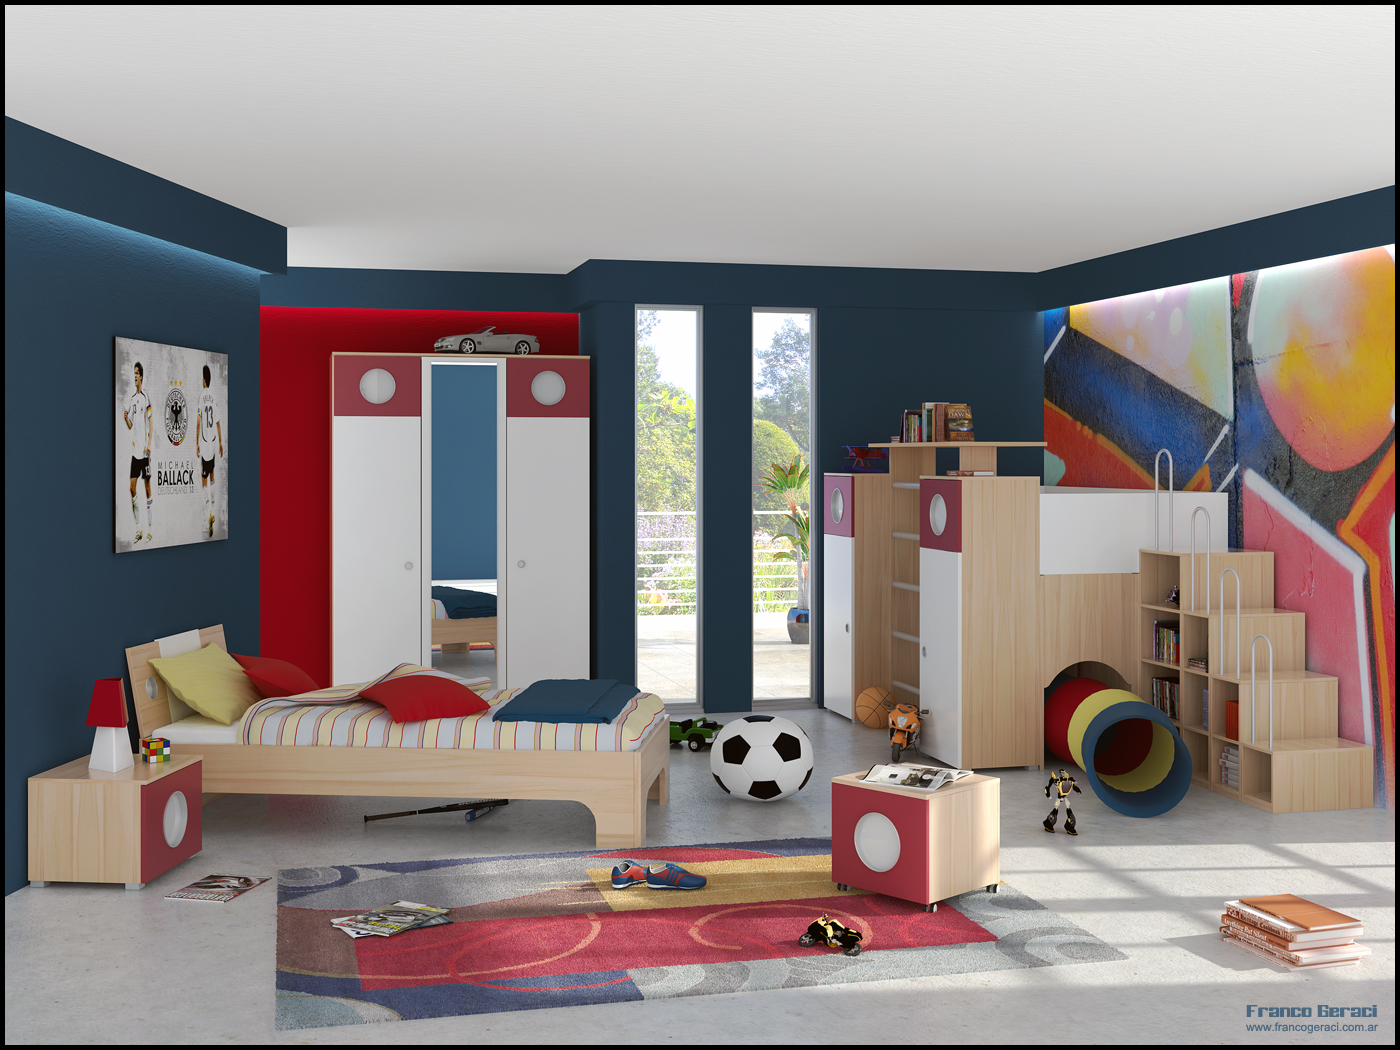 adorable boys bedroom "width =" 1400 "height =" 1050 "srcset =" https://mileray.com/wp-content/uploads/2020/05/1588508757_804_Adorable-Kids-Room-Designs-Which-Present-a-Modern-and-Trendy.jpg 1400w, https://mileray.com/ wp-content / uploads / 2016/11 / Franco-Geraci-300x225.jpg 300w, https://mileray.com/wp-content/uploads/2016/11/Franco-Geraci-768x576.jpg 768w, https: // mileray.com/wp-content/uploads/2016/11/Franco-Geraci-1024x768.jpg 1024w, https://mileray.com/wp-content/uploads/2016/11/Franco-Geraci-80x60.jpg 80w, https://mileray.com/wp-content/uploads/2016/11/Franco-Geraci-265x198.jpg 265w, https://mileray.com/wp-content/uploads/2016/11/Franco-Geraci-696x522 .jpg 696w, https://mileray.com/wp-content/uploads/2016/11/Franco-Geraci-1068x801.jpg 1068w, https://mileray.com/wp-content/uploads/2016/11/Franco -Geraci-560x420.jpg 560w "sizes =" (maximum width: 1400px) 100vw, 1400px